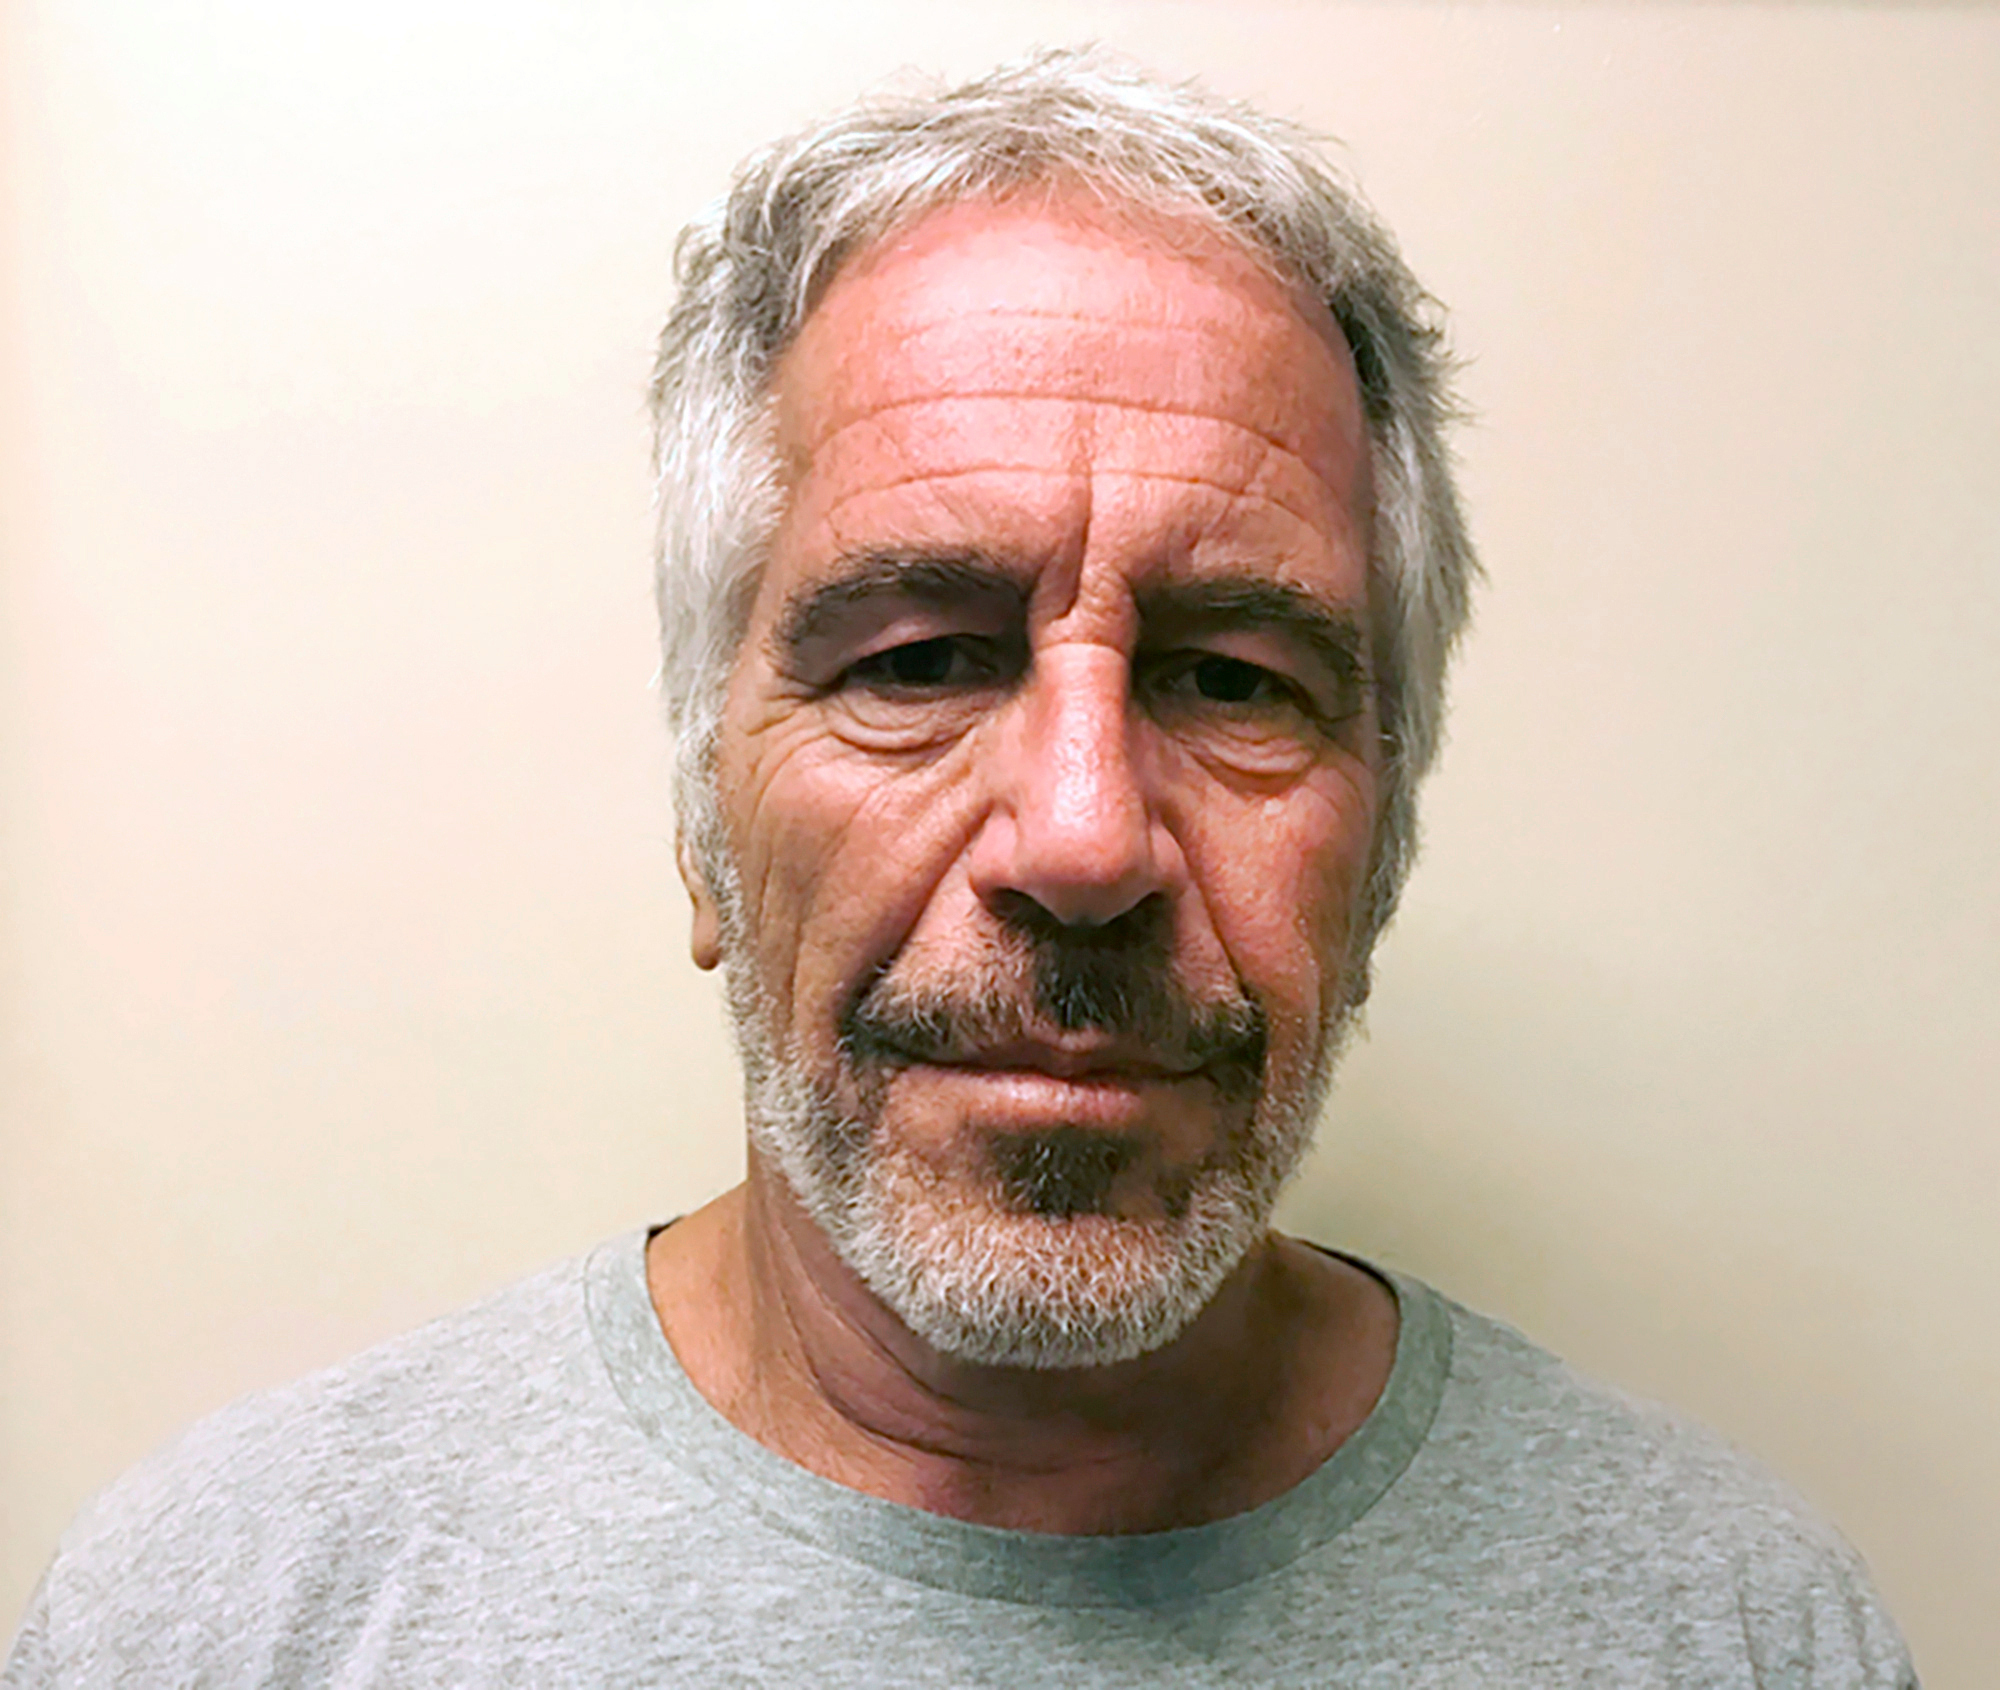  Epstein was found hanged in his cell in August last year in an apparent suicide while awaiting trial on sex-trafficking charges